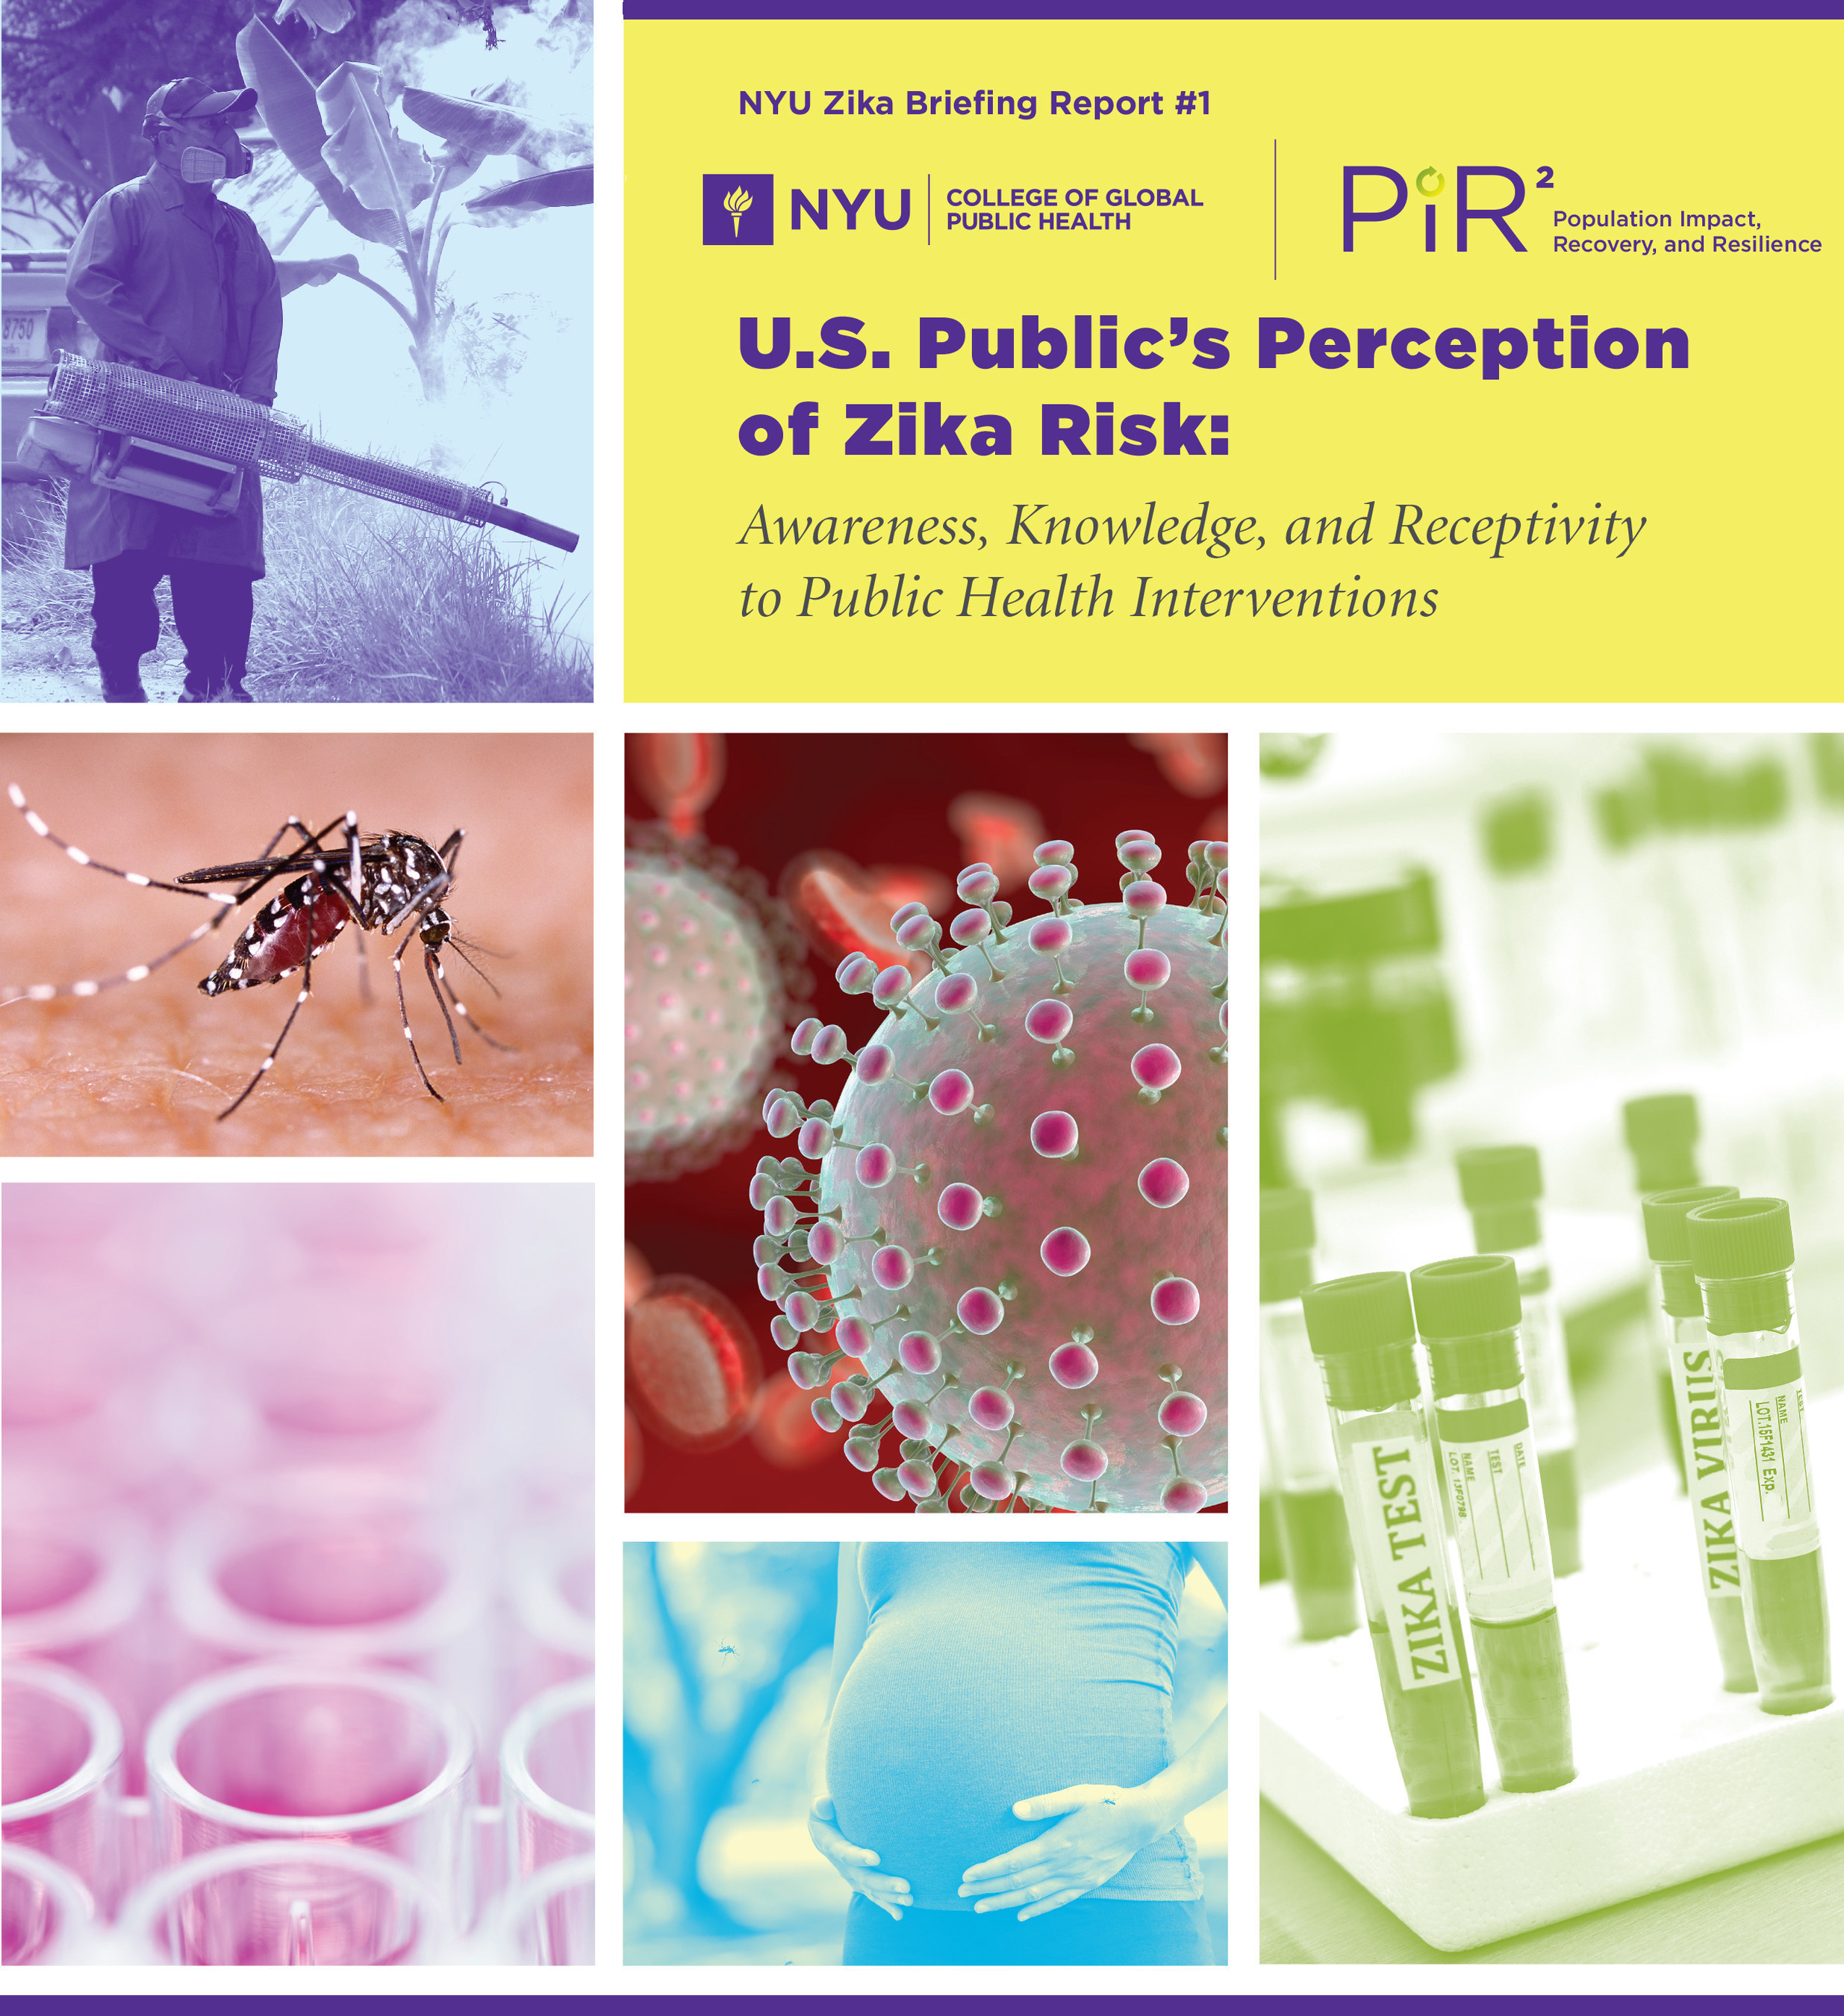 The study, "U.S. Public's Perception of Zika Risk: Awareness, Knowledge, and Receptivity to Public Health Interventions," by the Program for Population Impact, Recovery and Resilience (PiR2) at NYU CGPH, notes that even though a large majority of the public is aware of the Zika virus, people are split on their support for various public health interventions to prevent or address Zika infections.